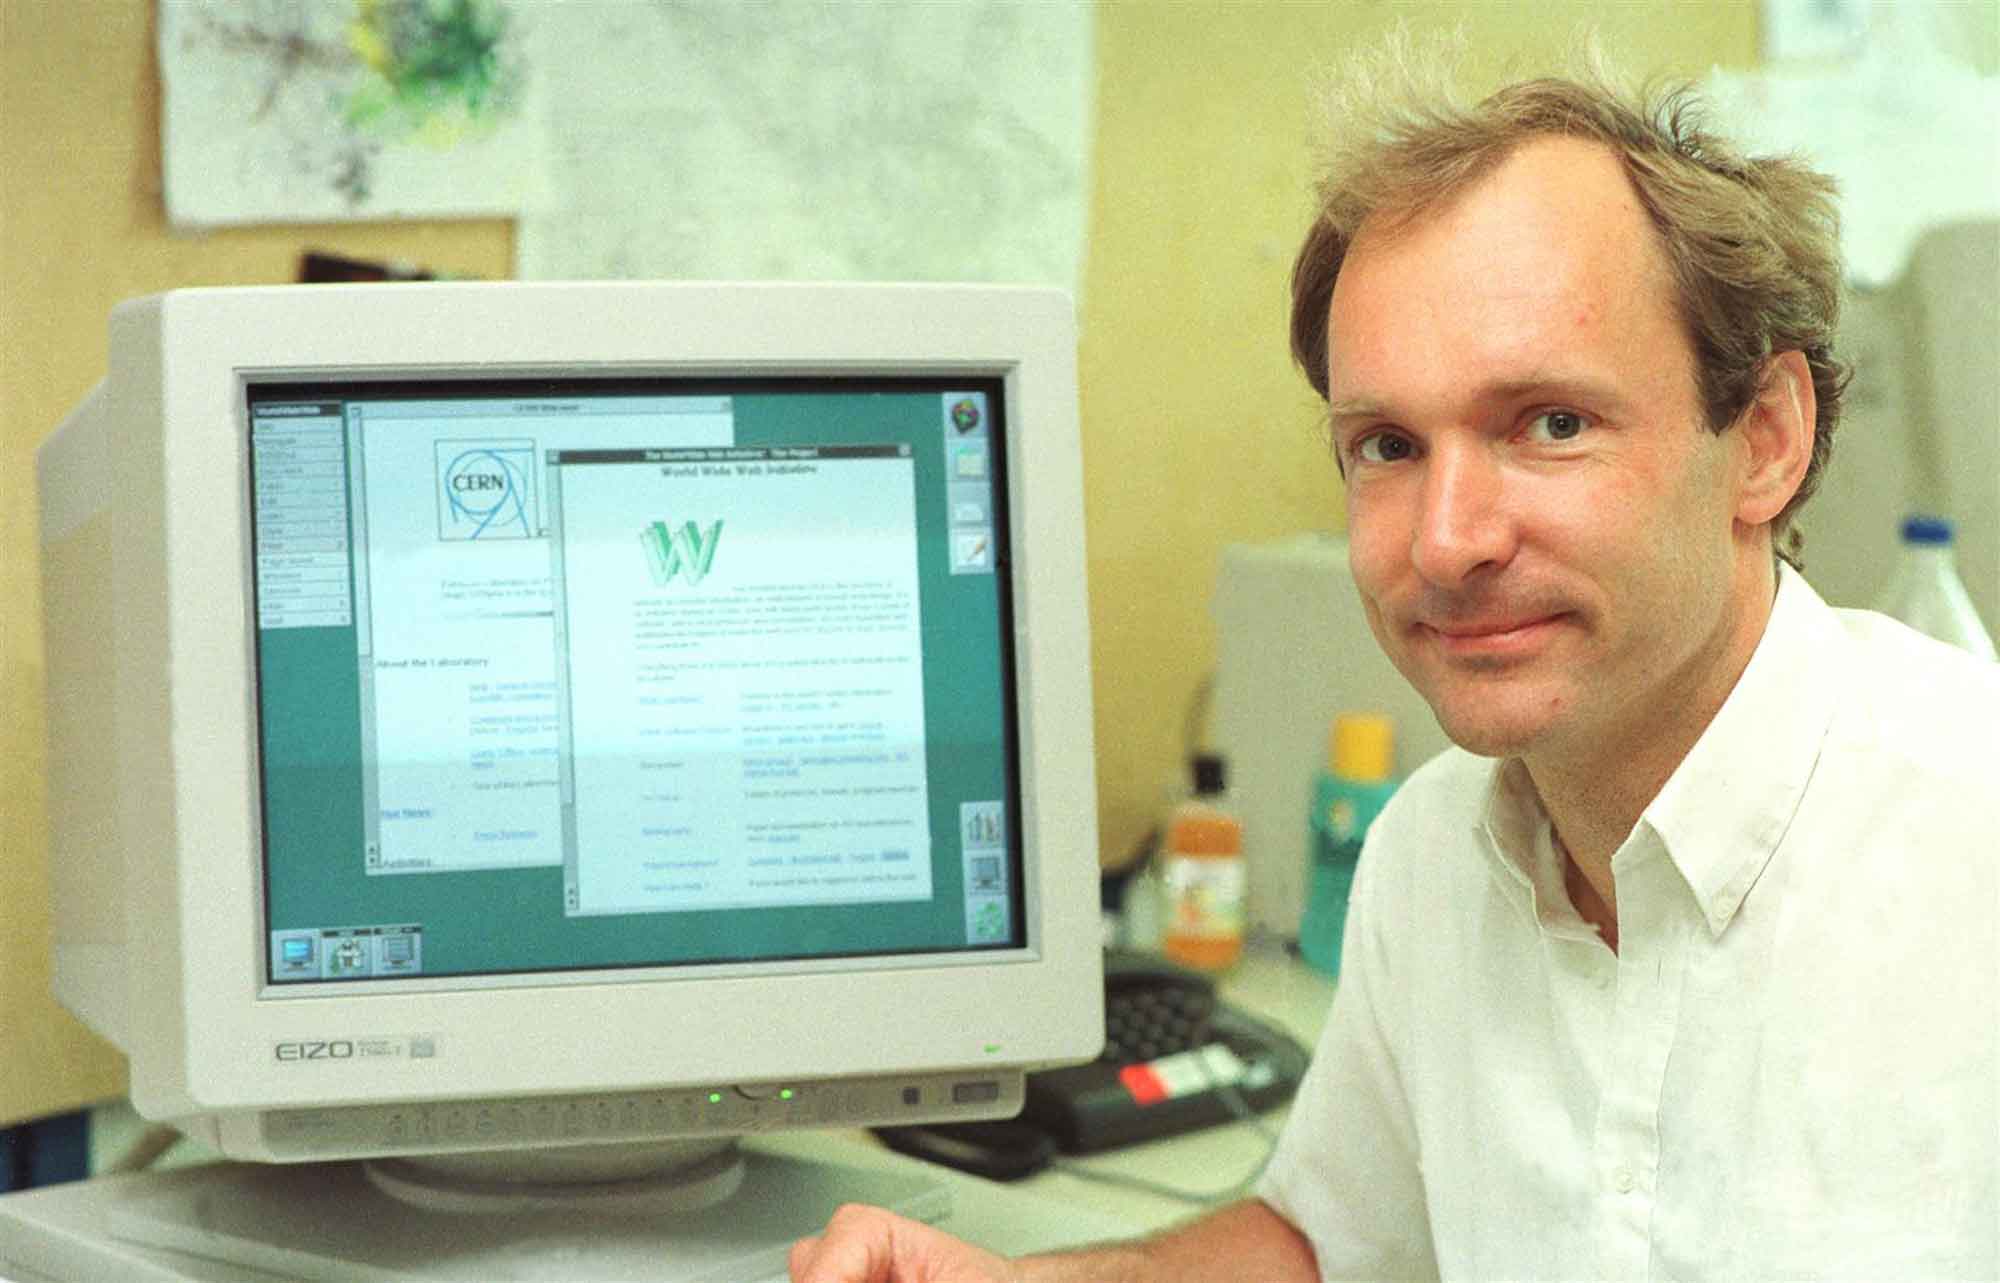 A Photograph of Tim Berners-Lee